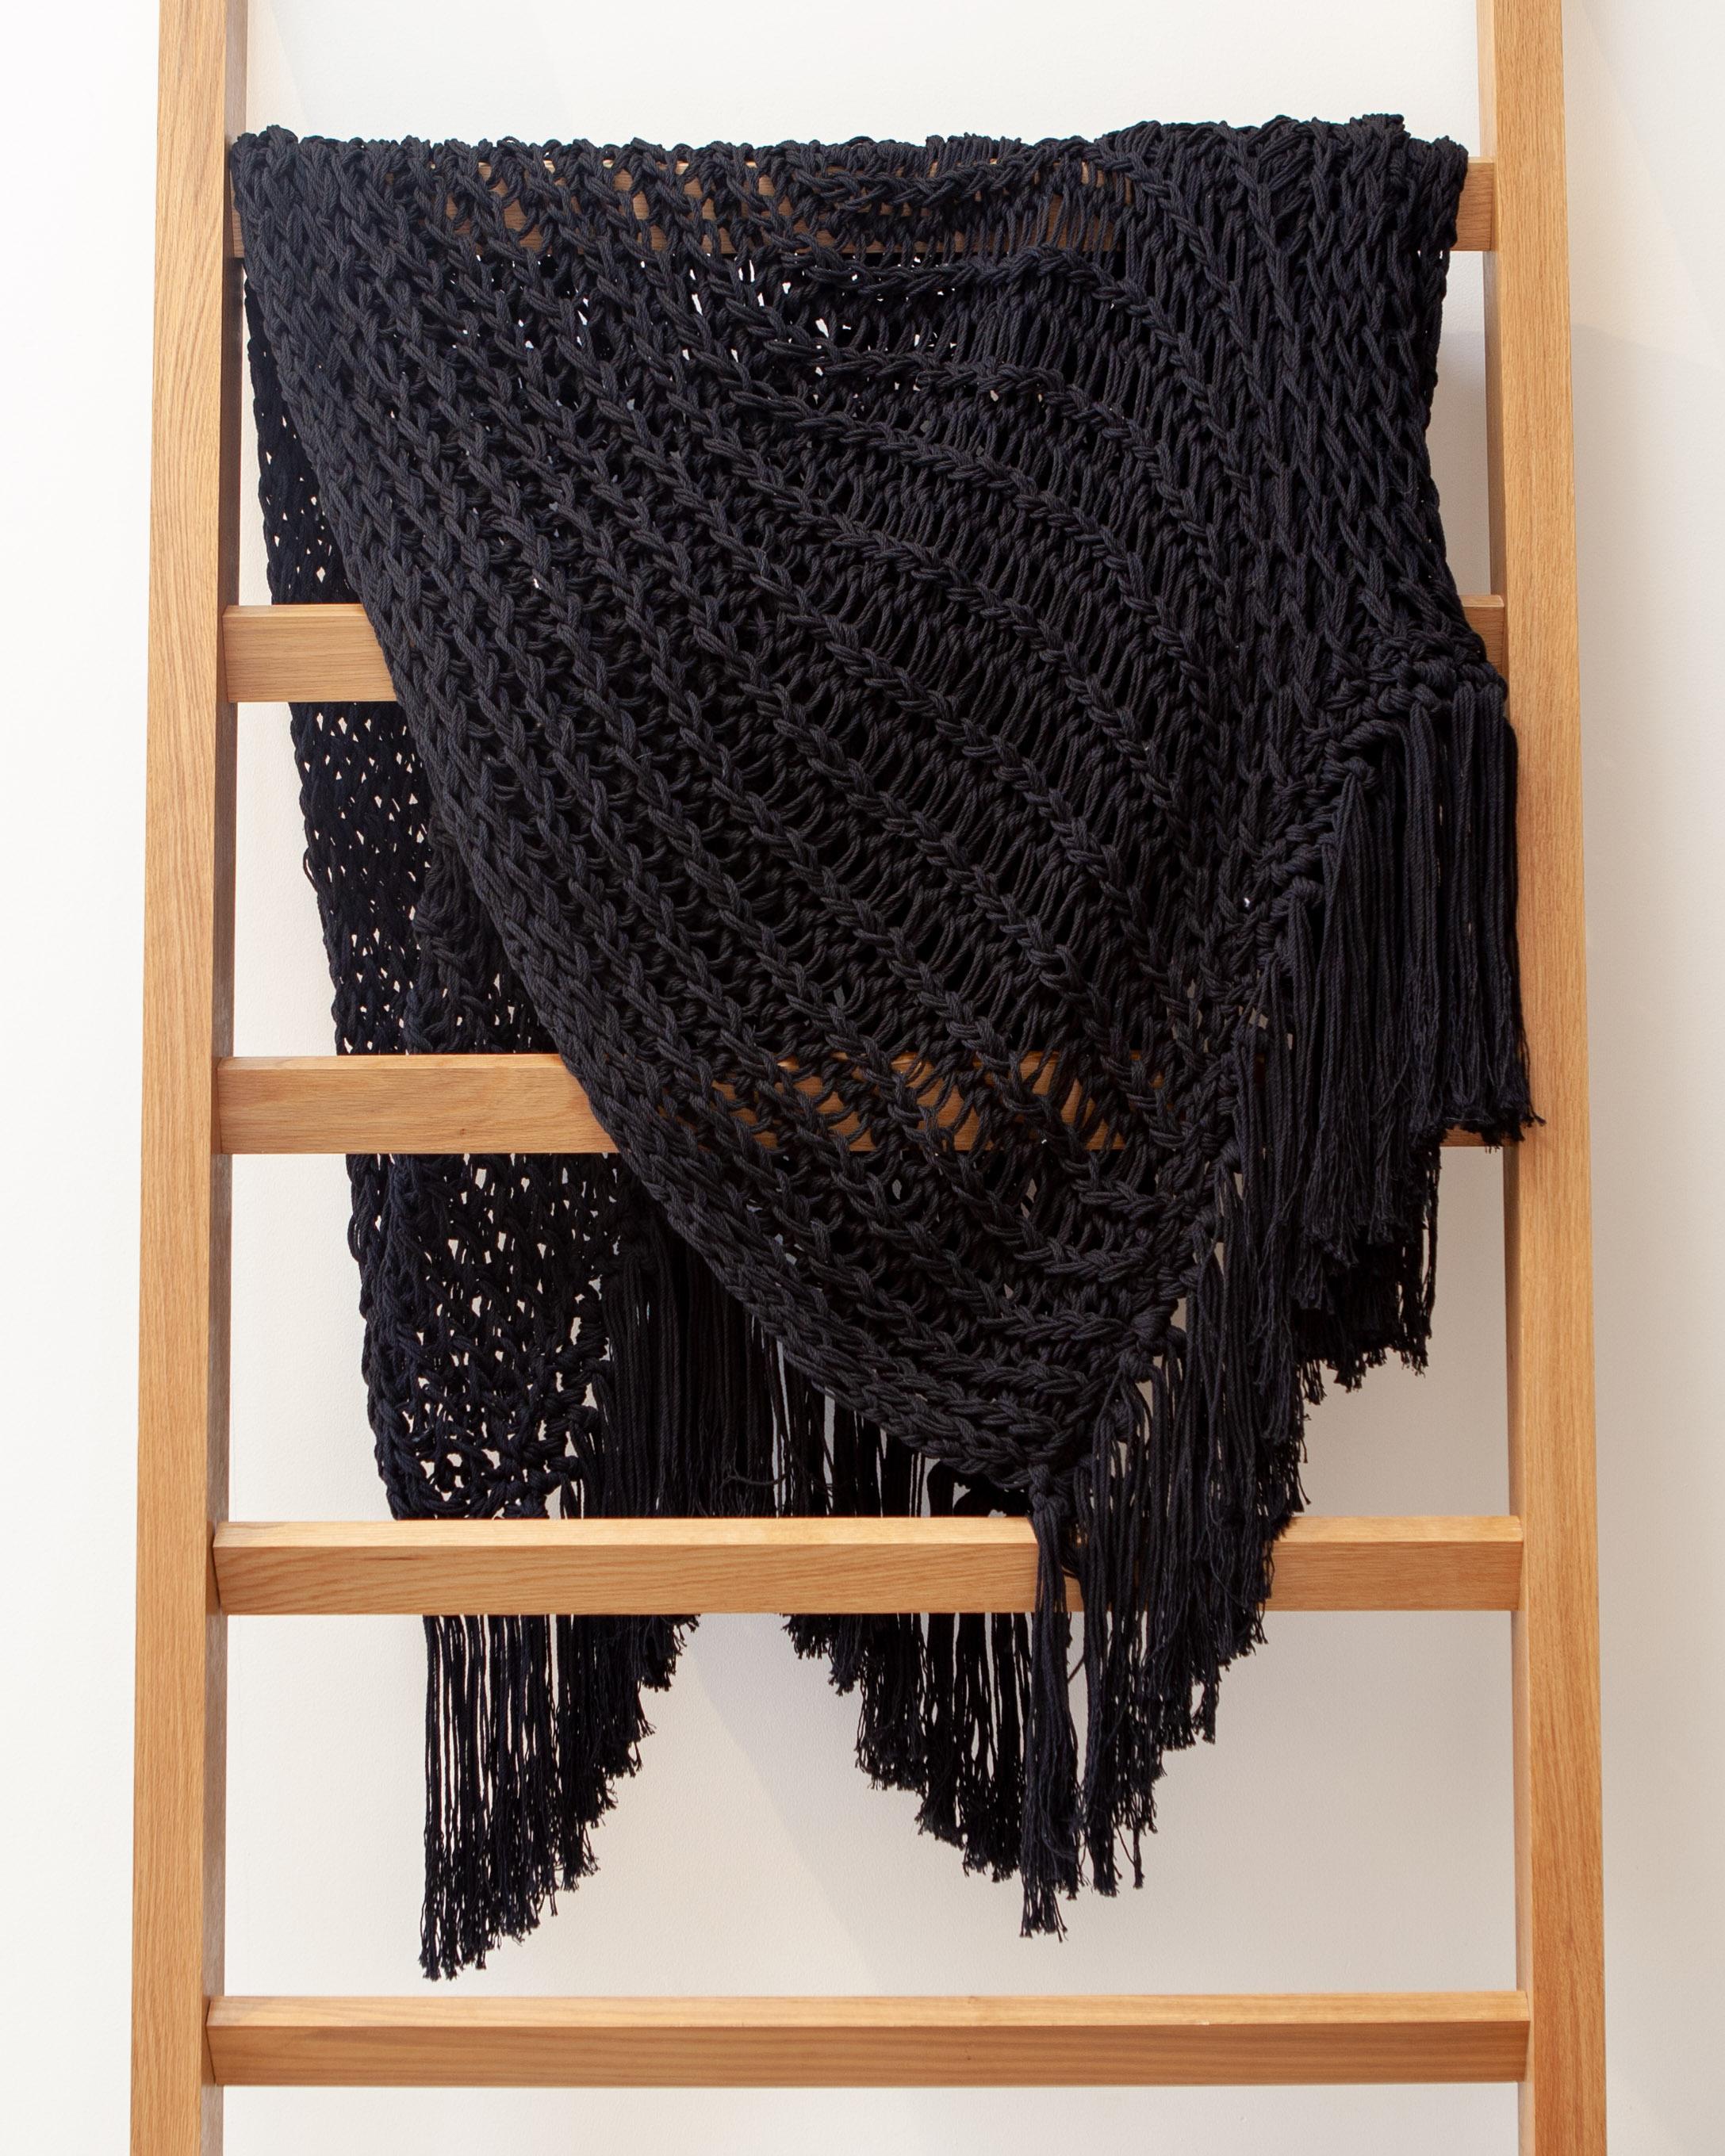 This black artisan throw is handmade from recycled cotton, a natural material that gives it a high-end look and feel. With an open weave design, it adds a luxurious element to home decor. This designer piece in classic black is perfect to bring a